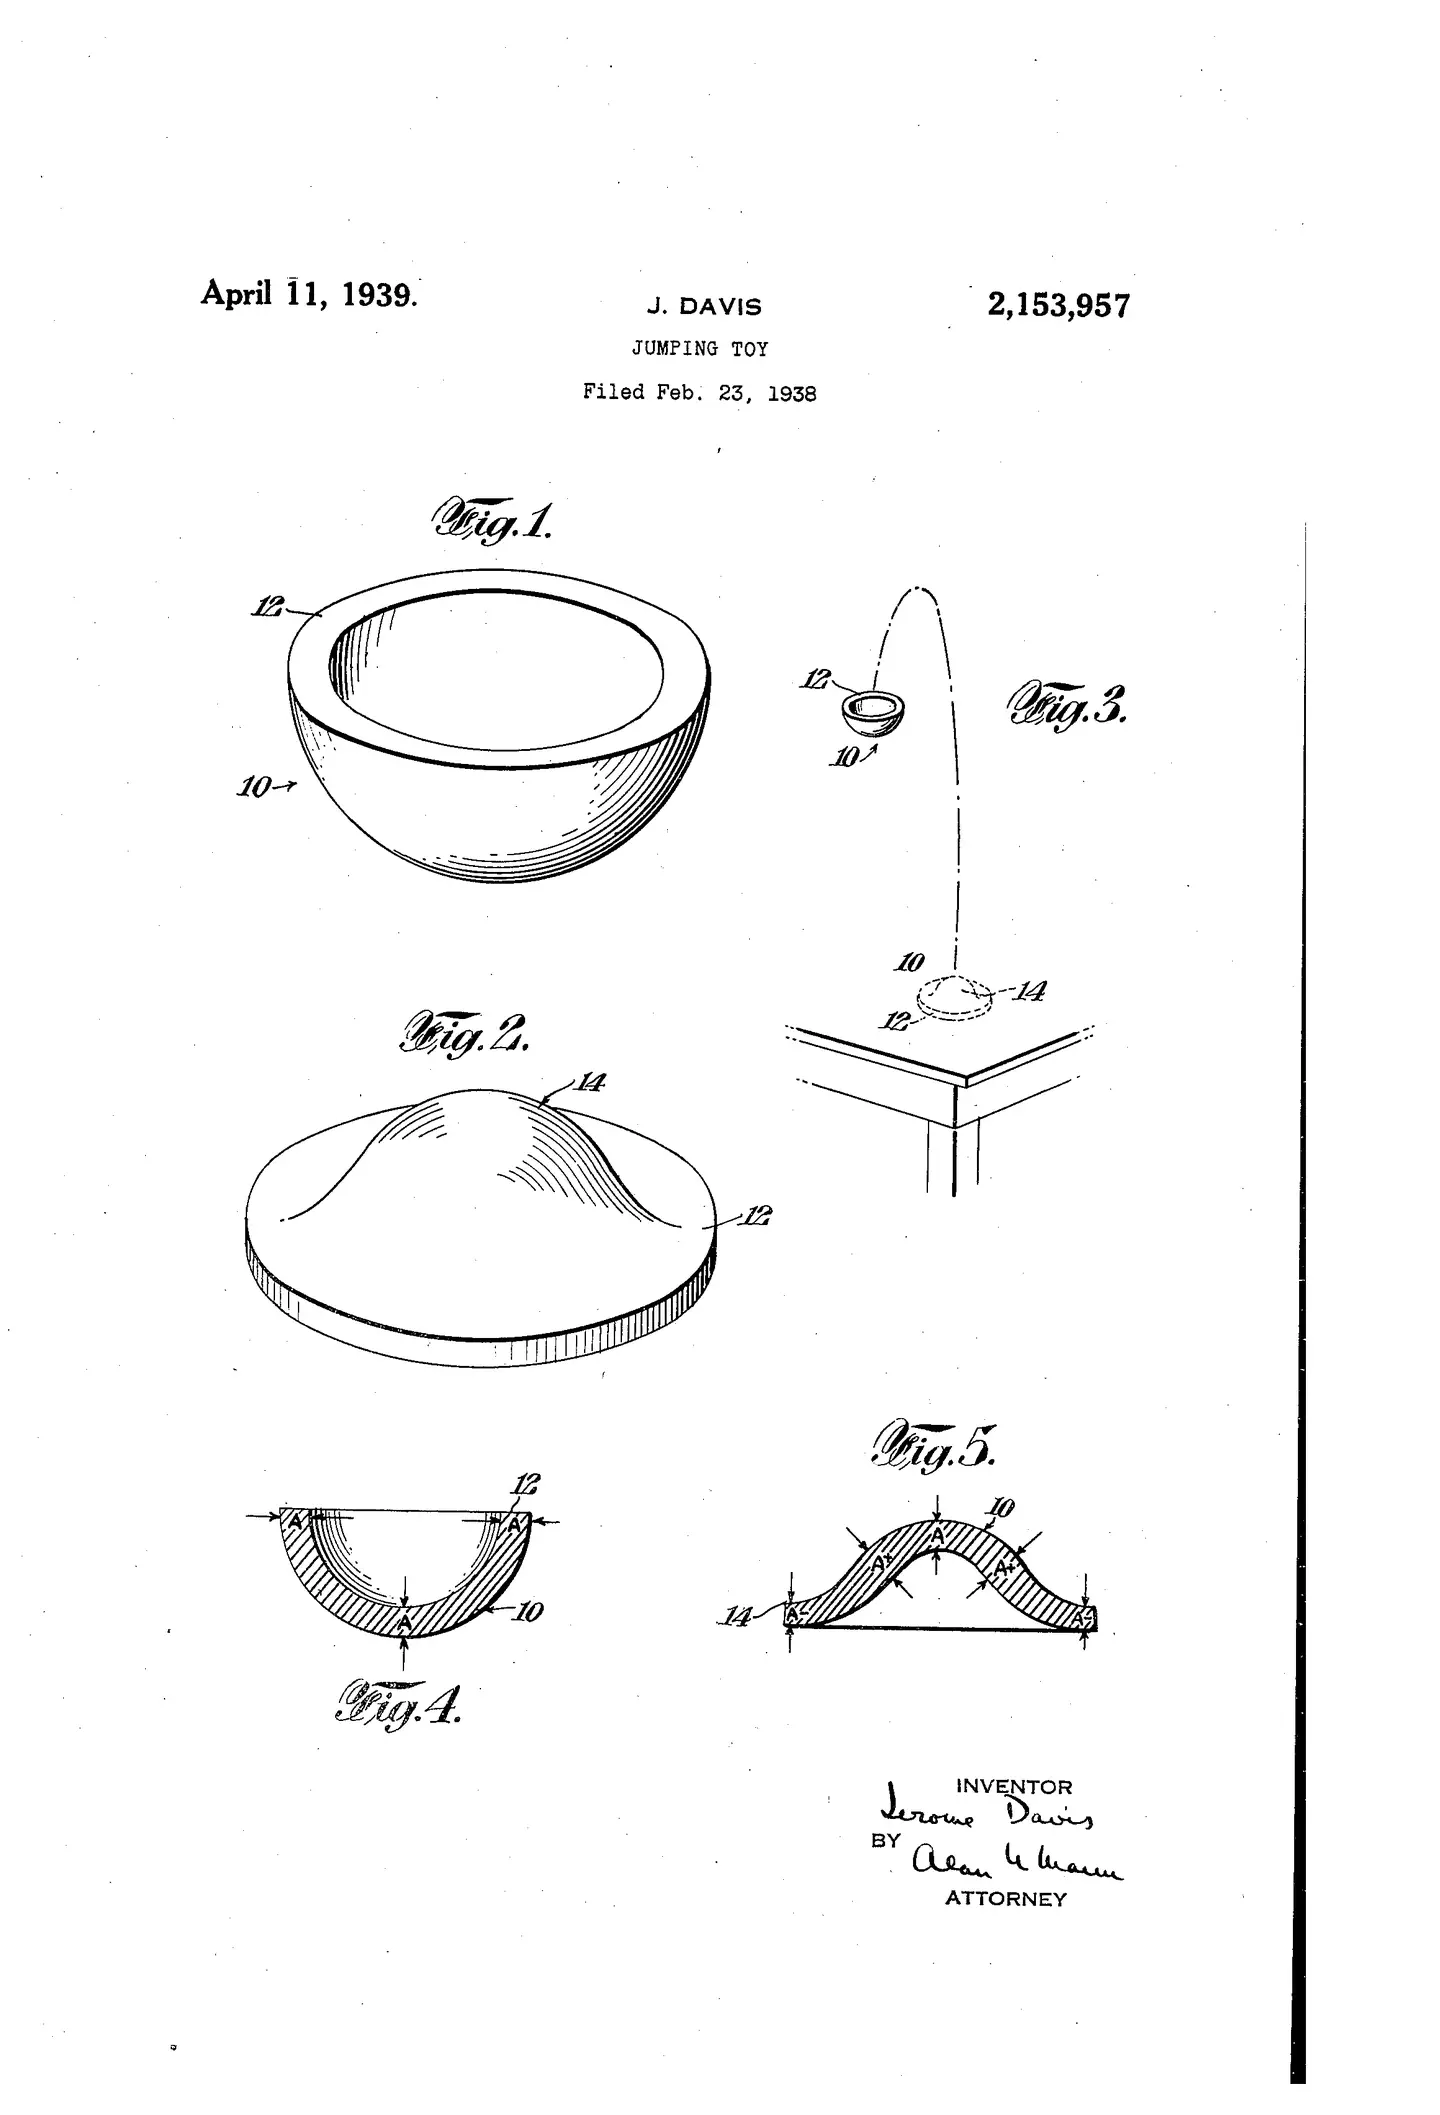 Here's the patent document showing how they work.